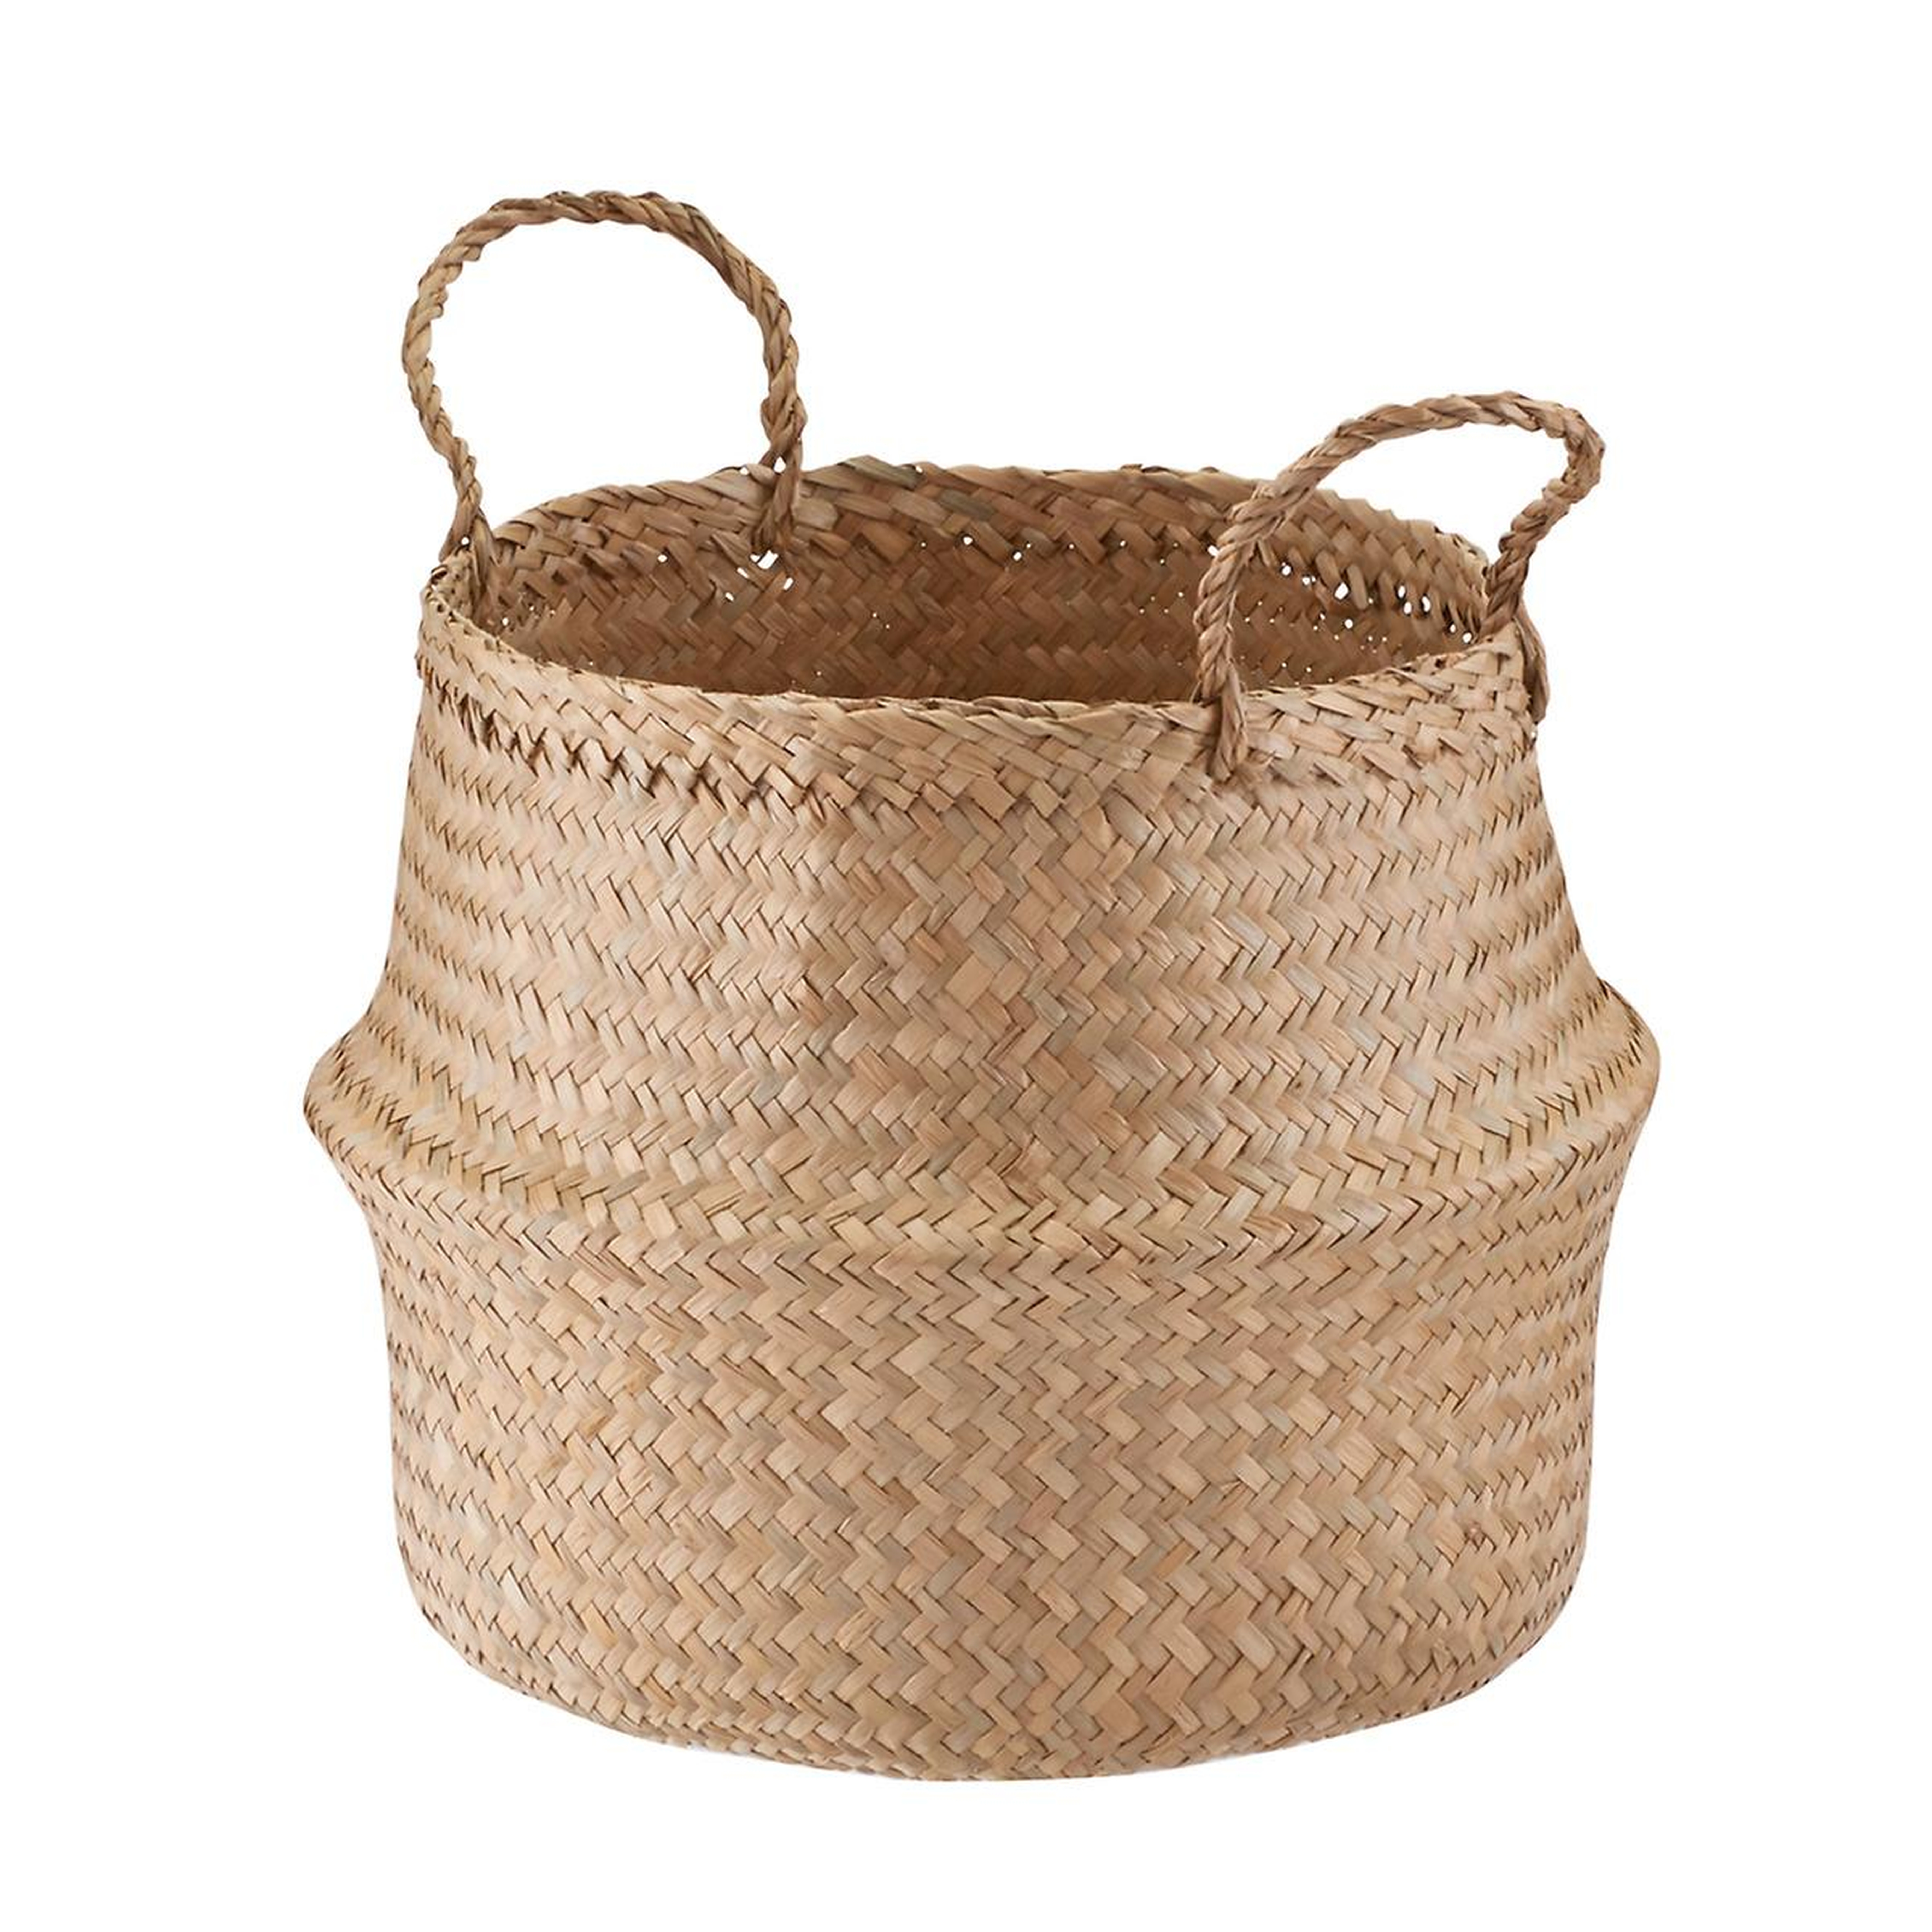 Small Seagrass Belly Basket - containerstore.com